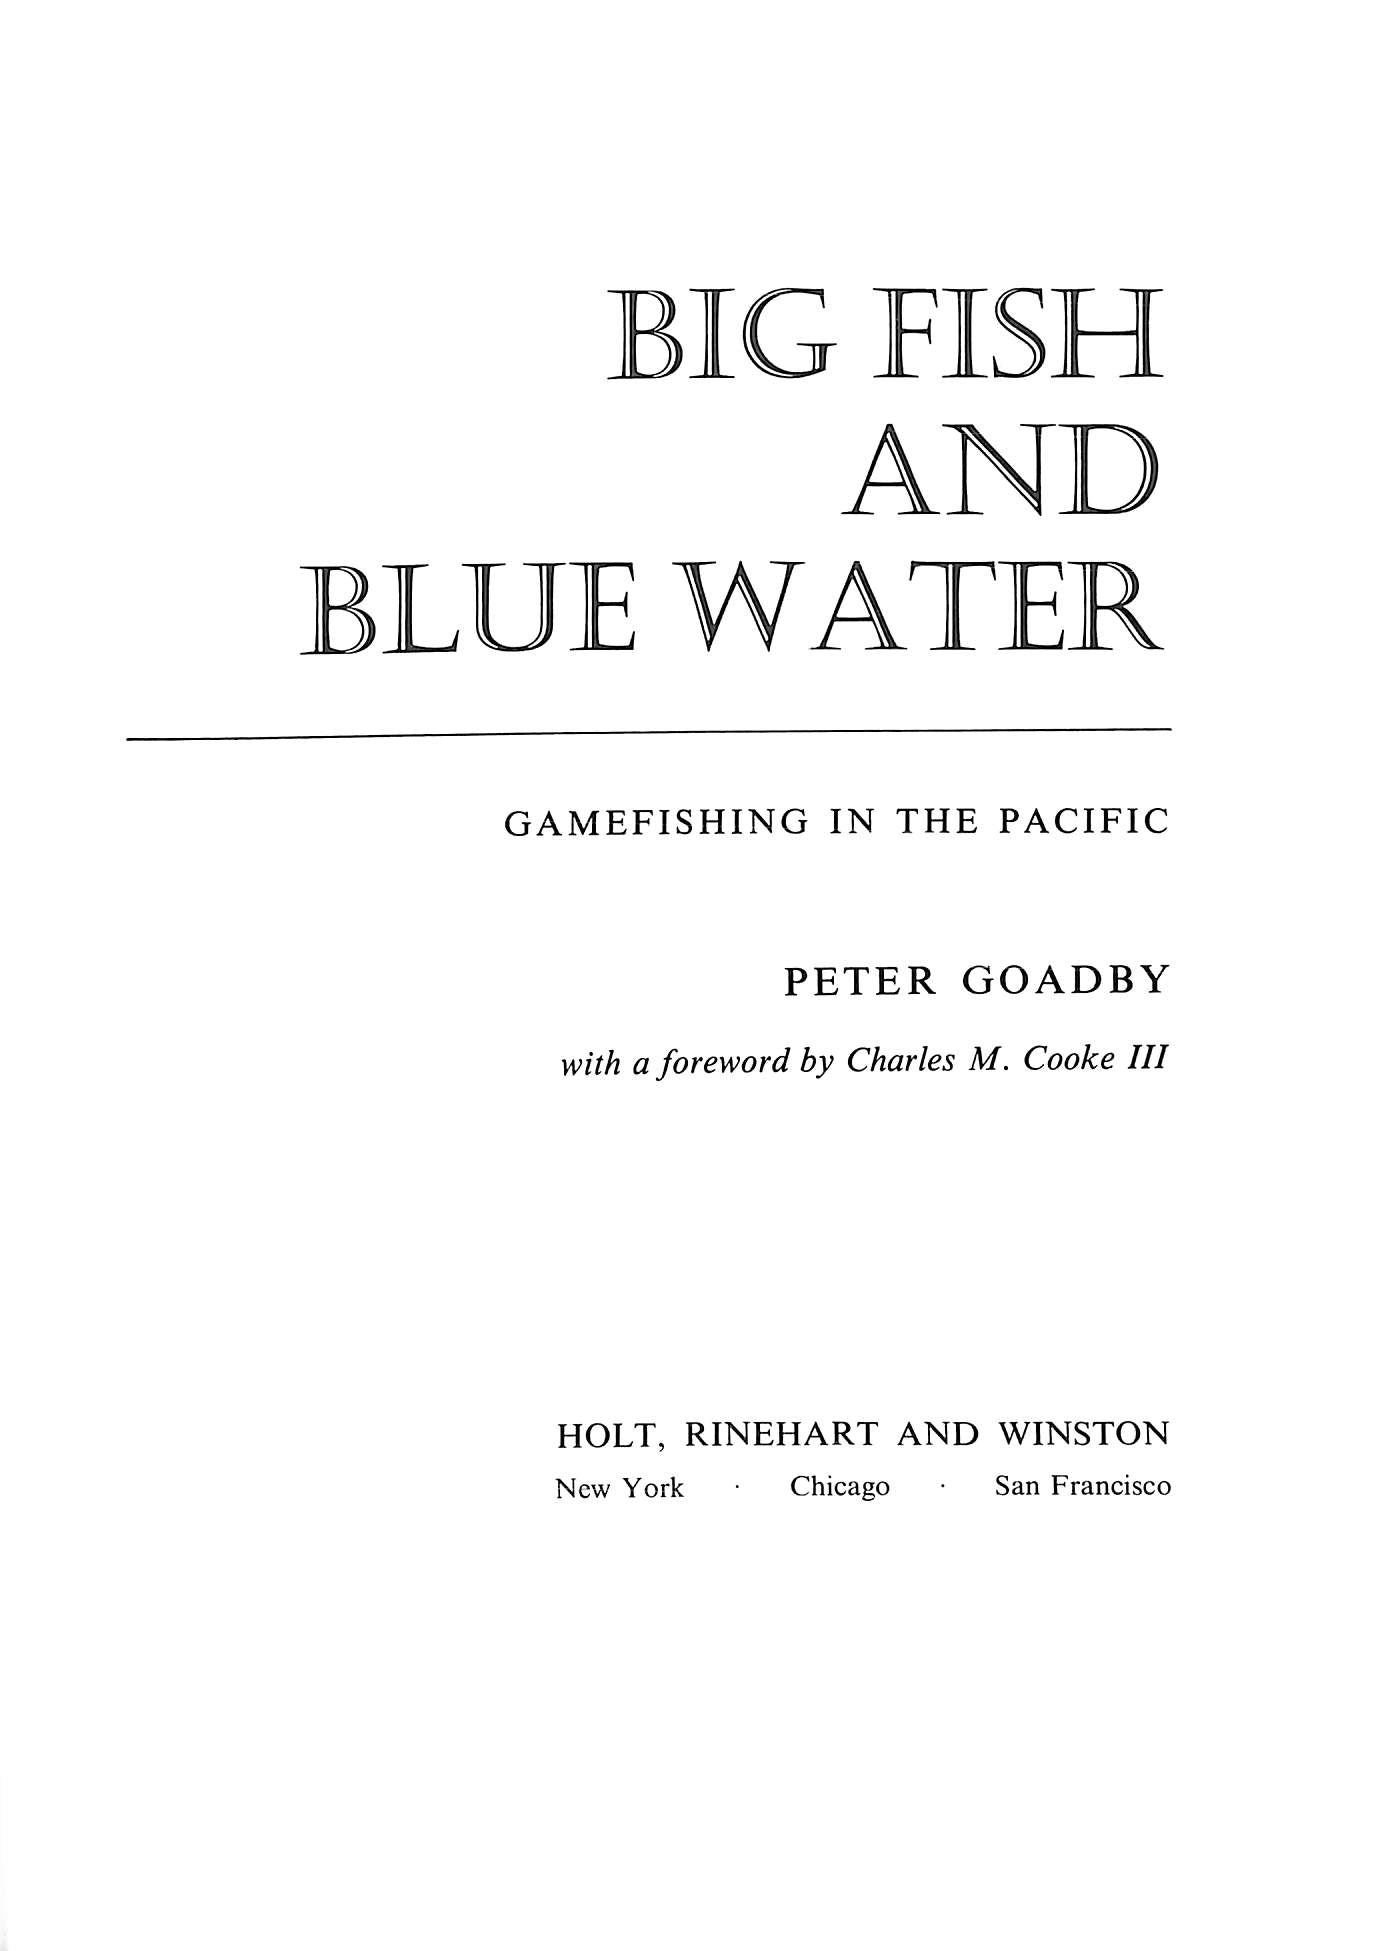 BIG FISH AND Blue Water Pacific Gamefishing Peter Goadby 1970